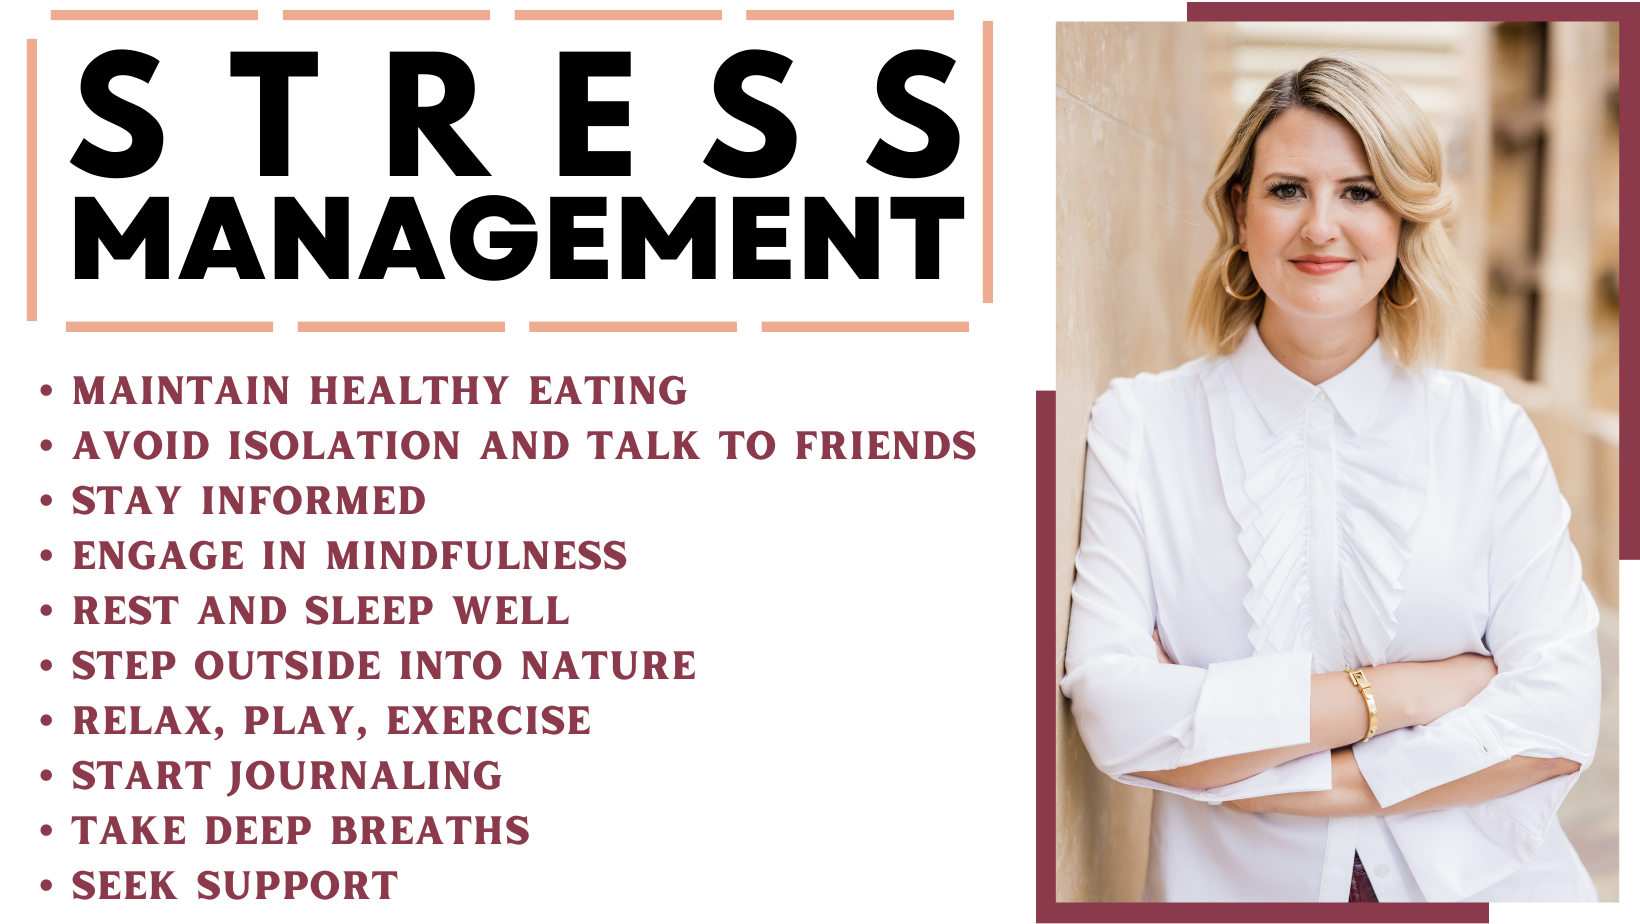 Stress Management - Reduce and Relieve Stress - Chennai